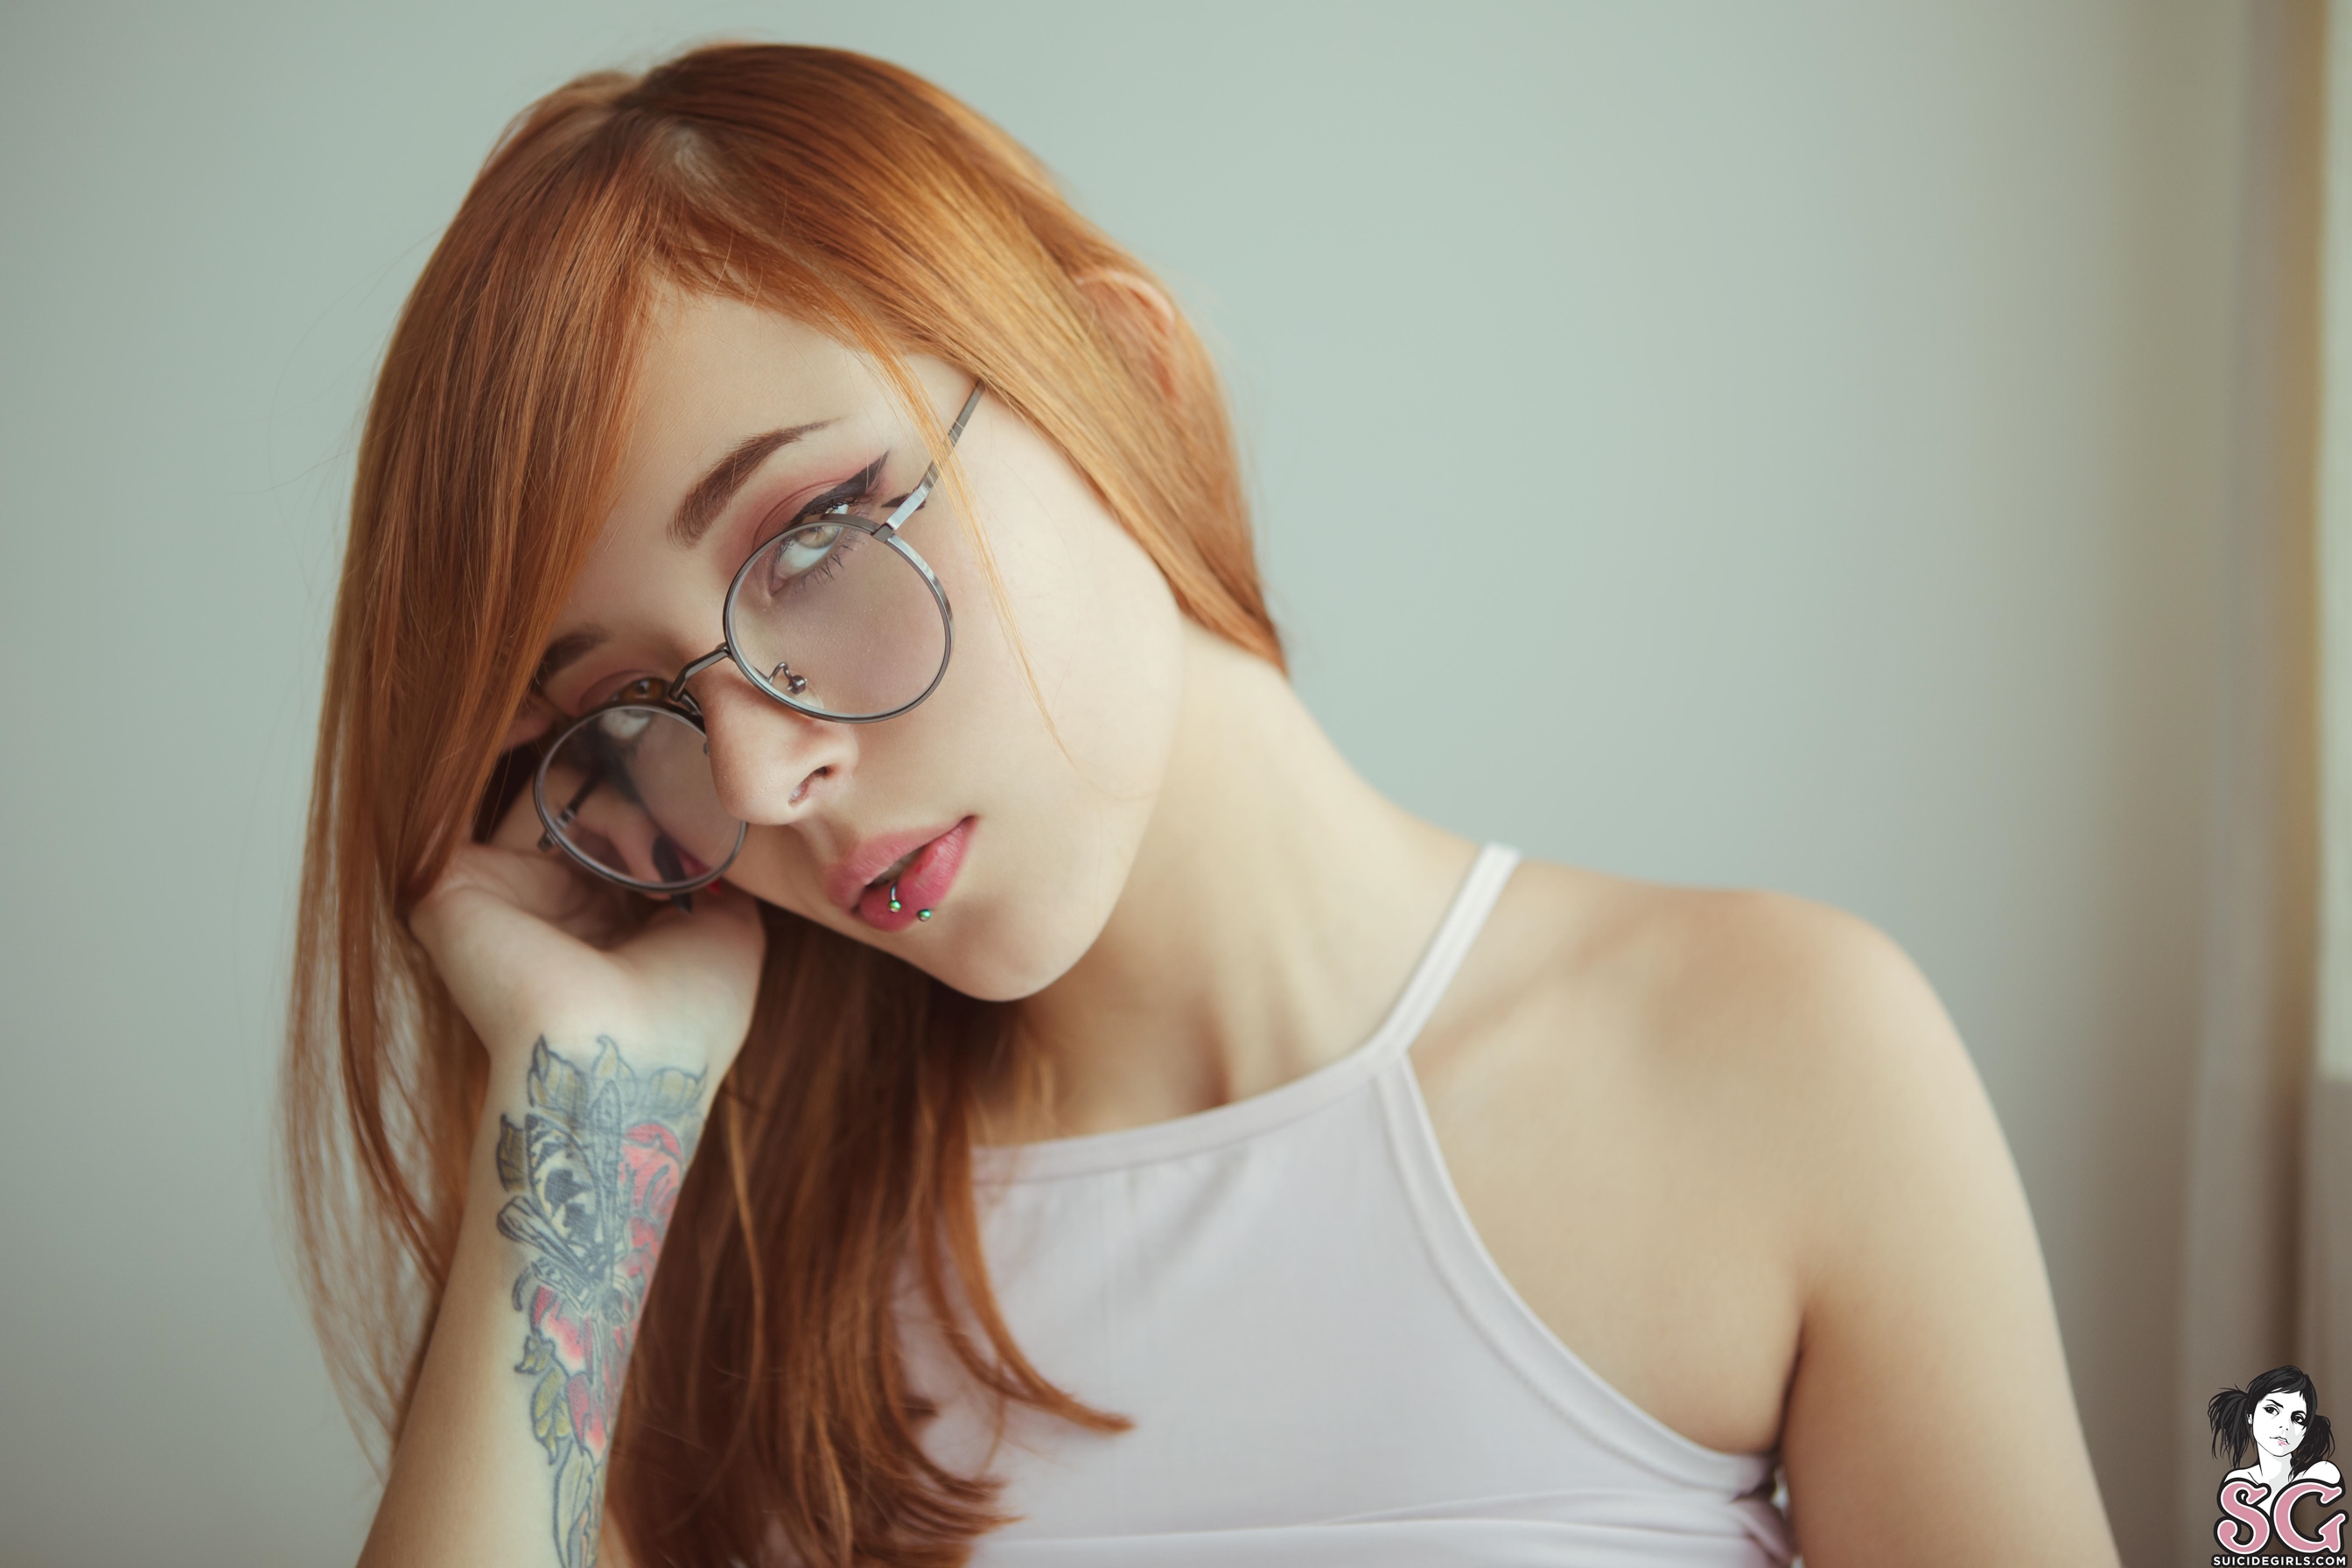 Redhead Women Model Face Tattoo Bare Shoulders Piercing Women With Glasses 2688x1792